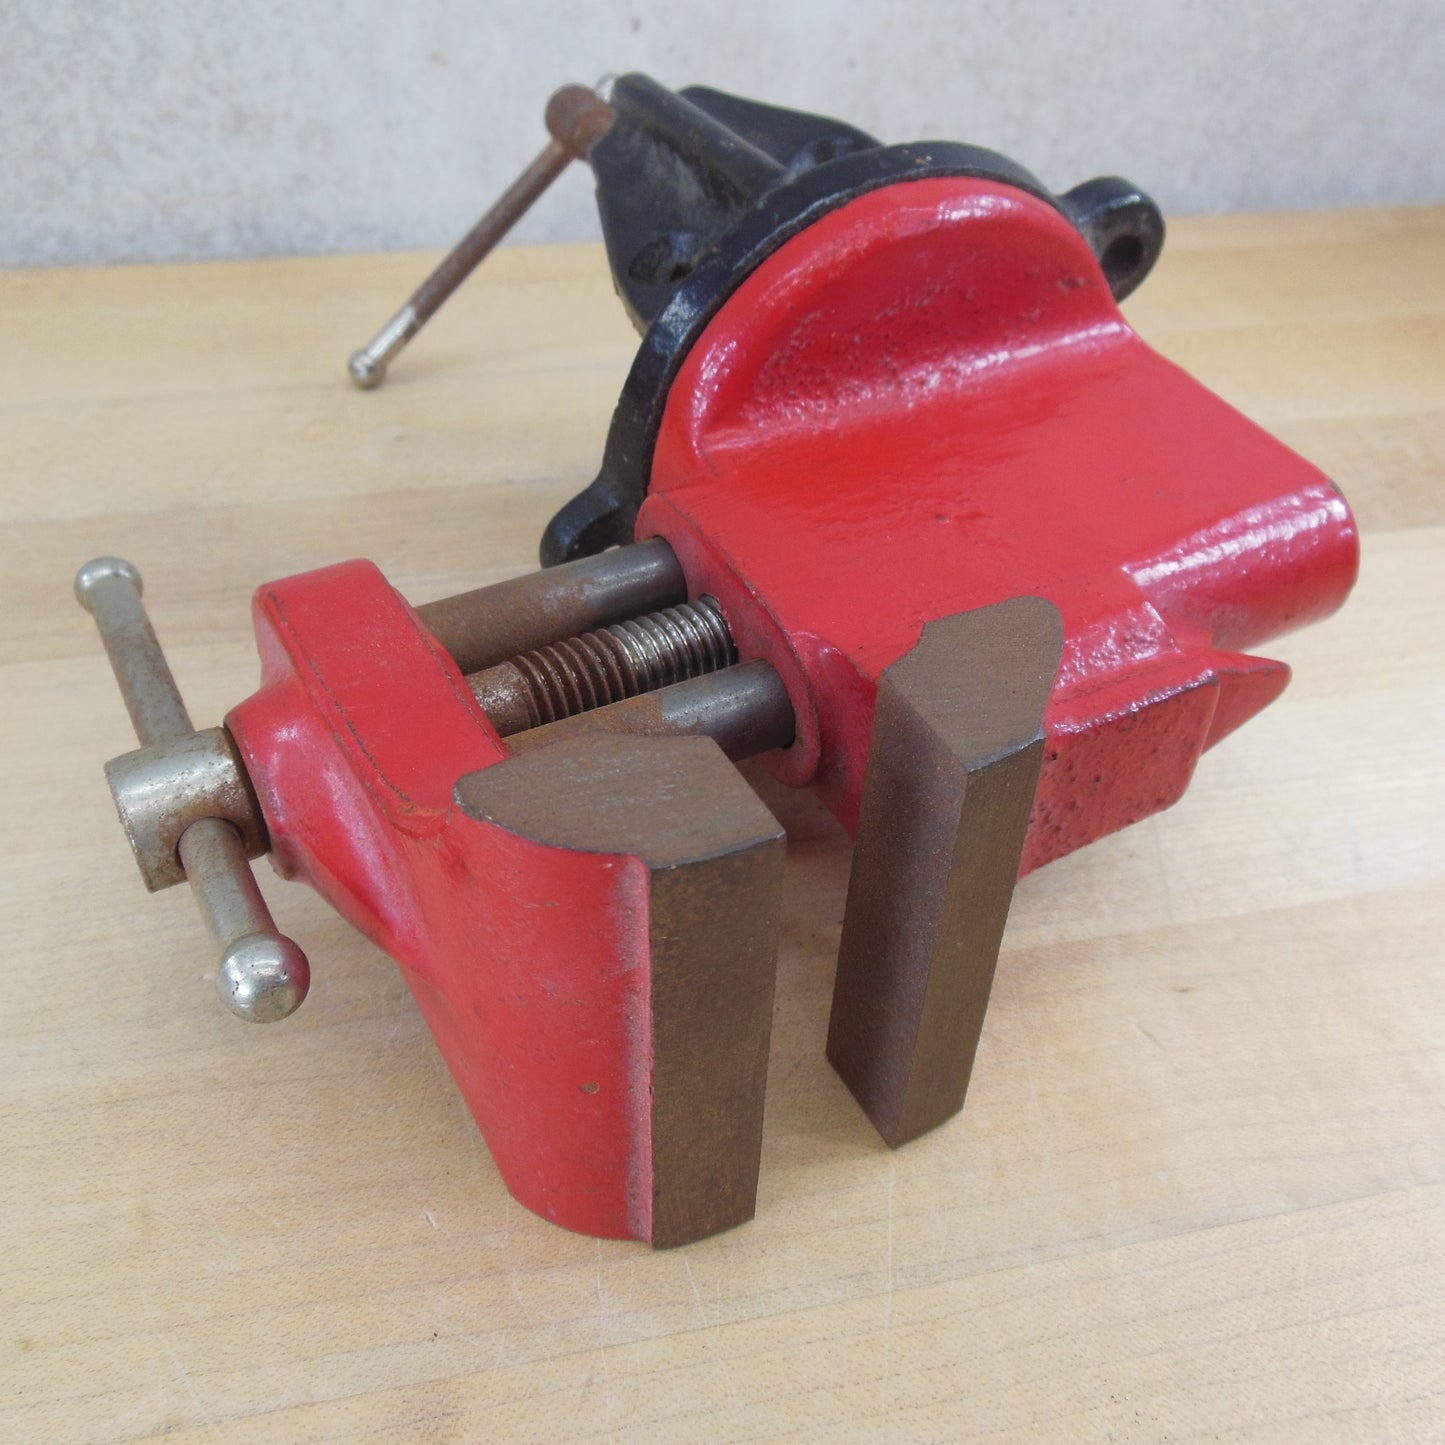 Unbranded Small Clamp On Bench Vise 2-1/2" Jaws Red Black used